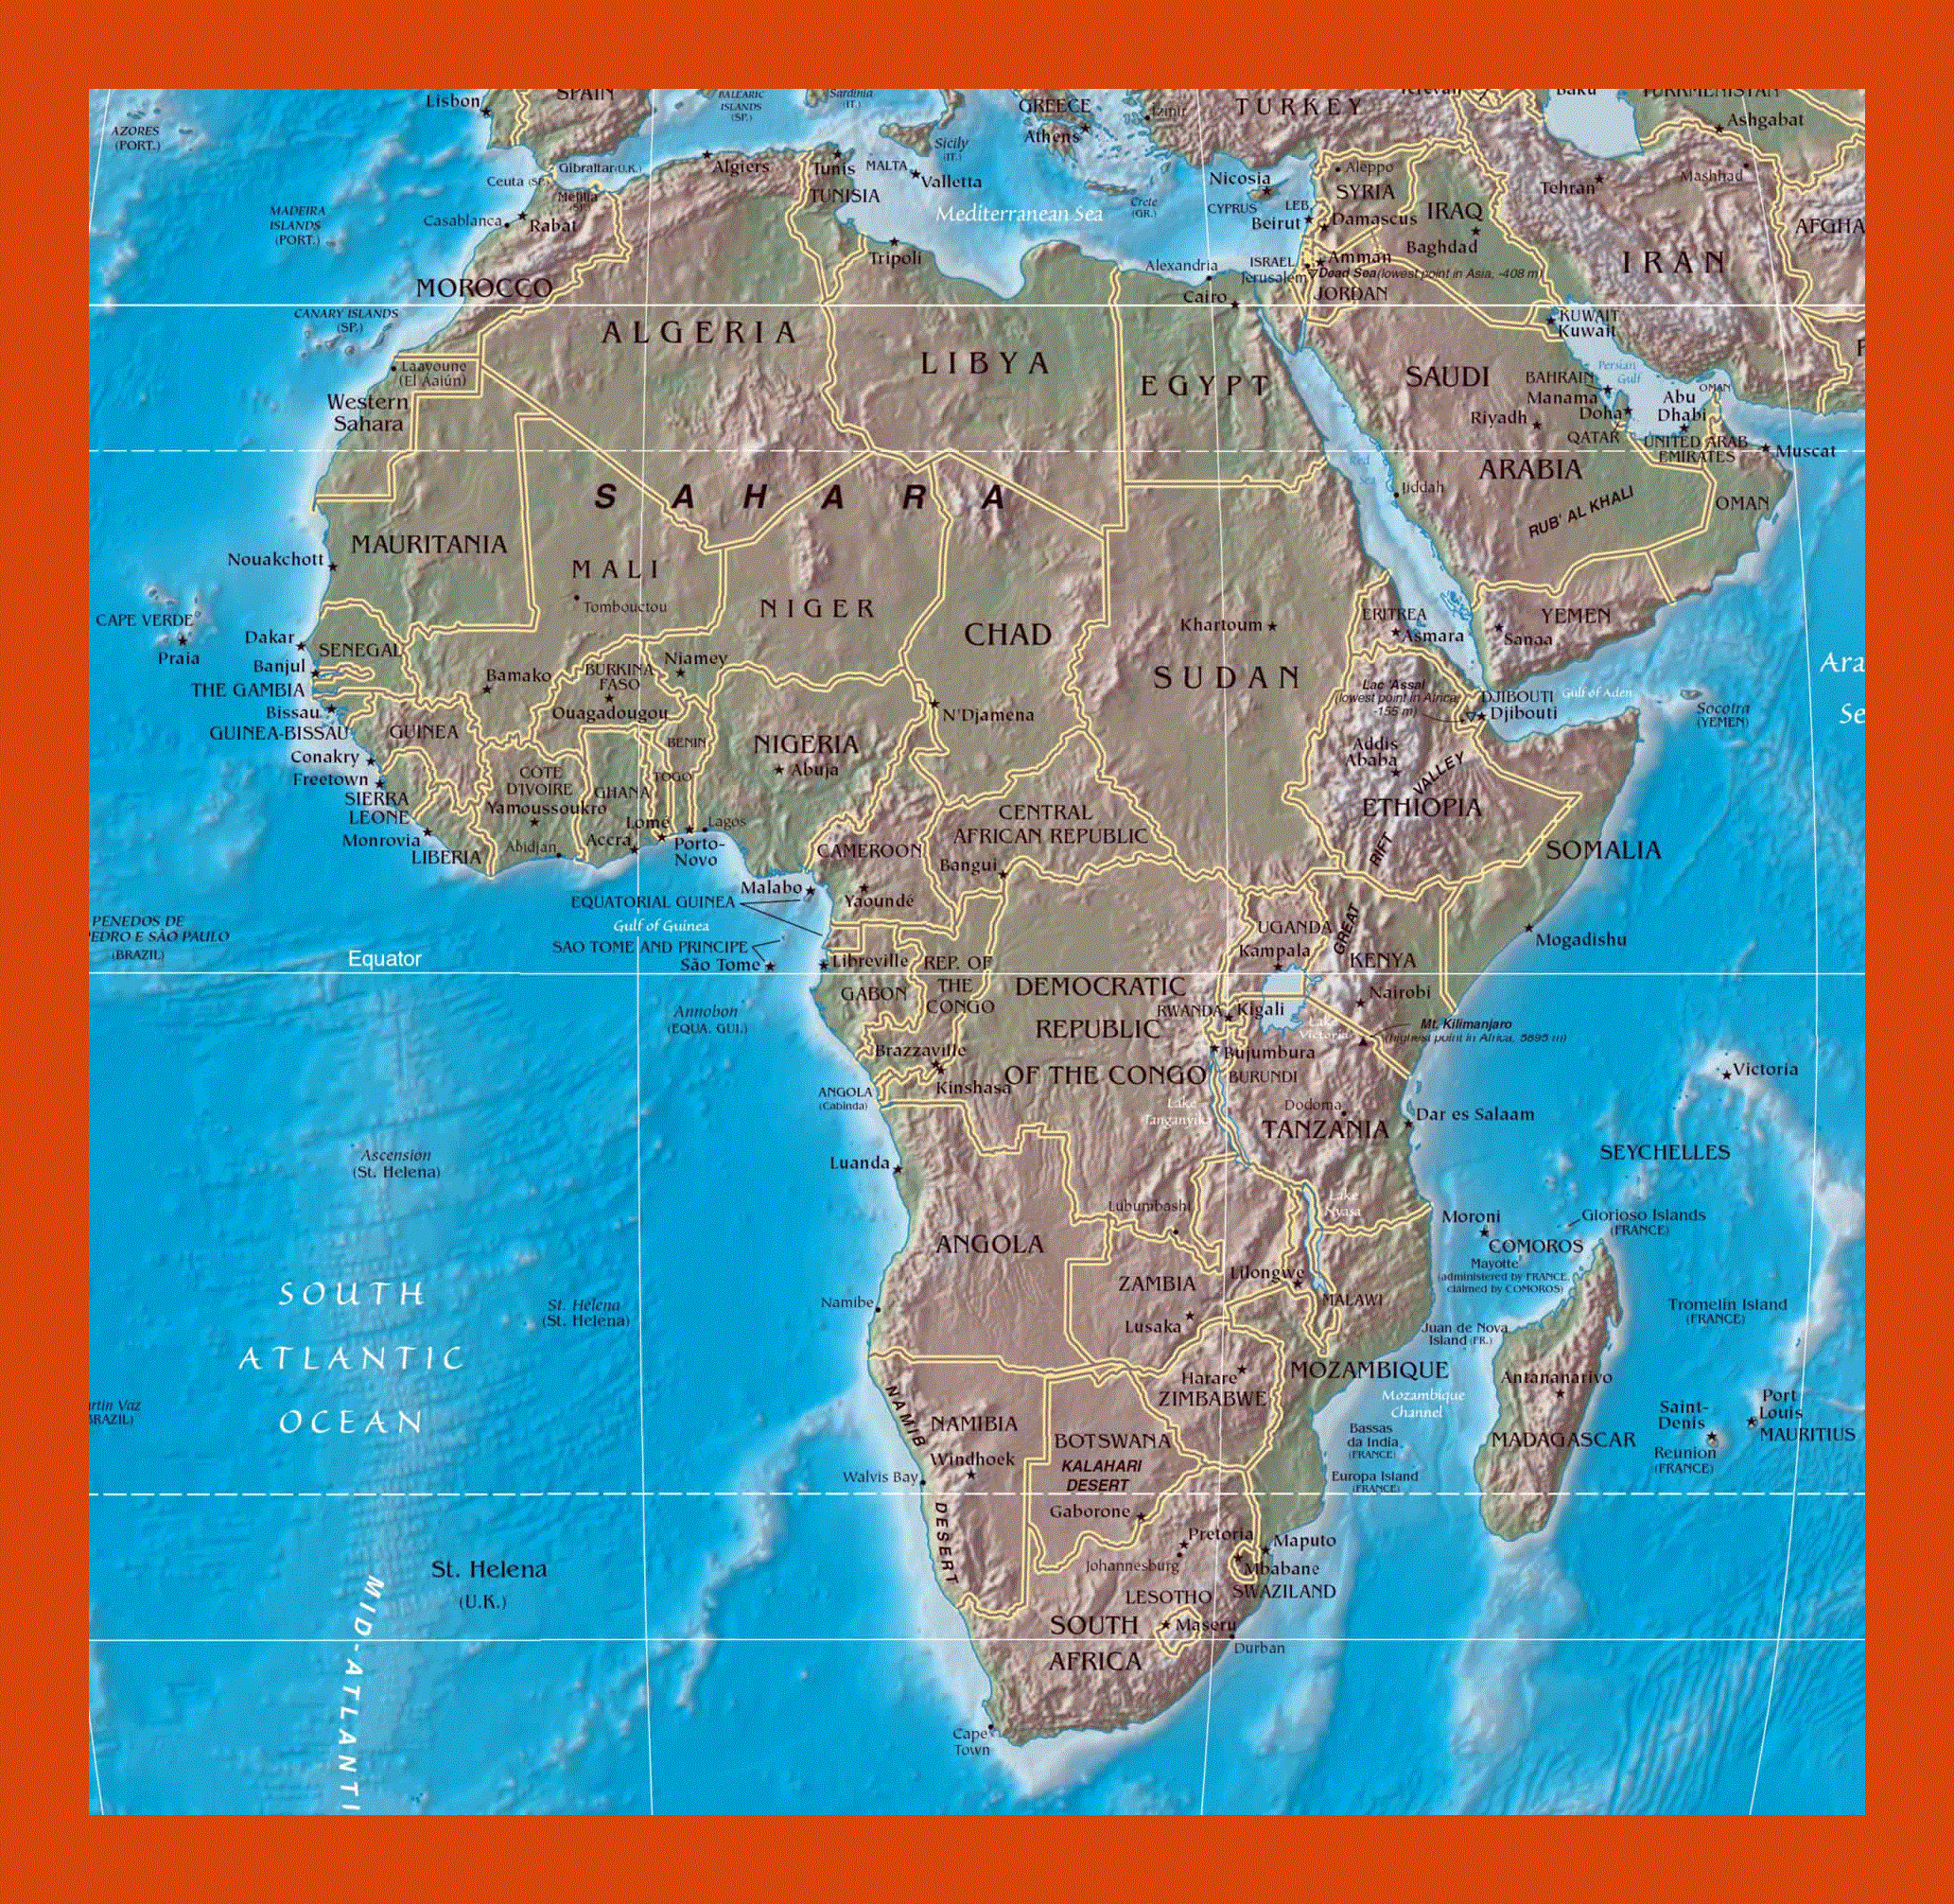 Political map of Africa | Maps of Africa | GIF map | Maps of the World ...